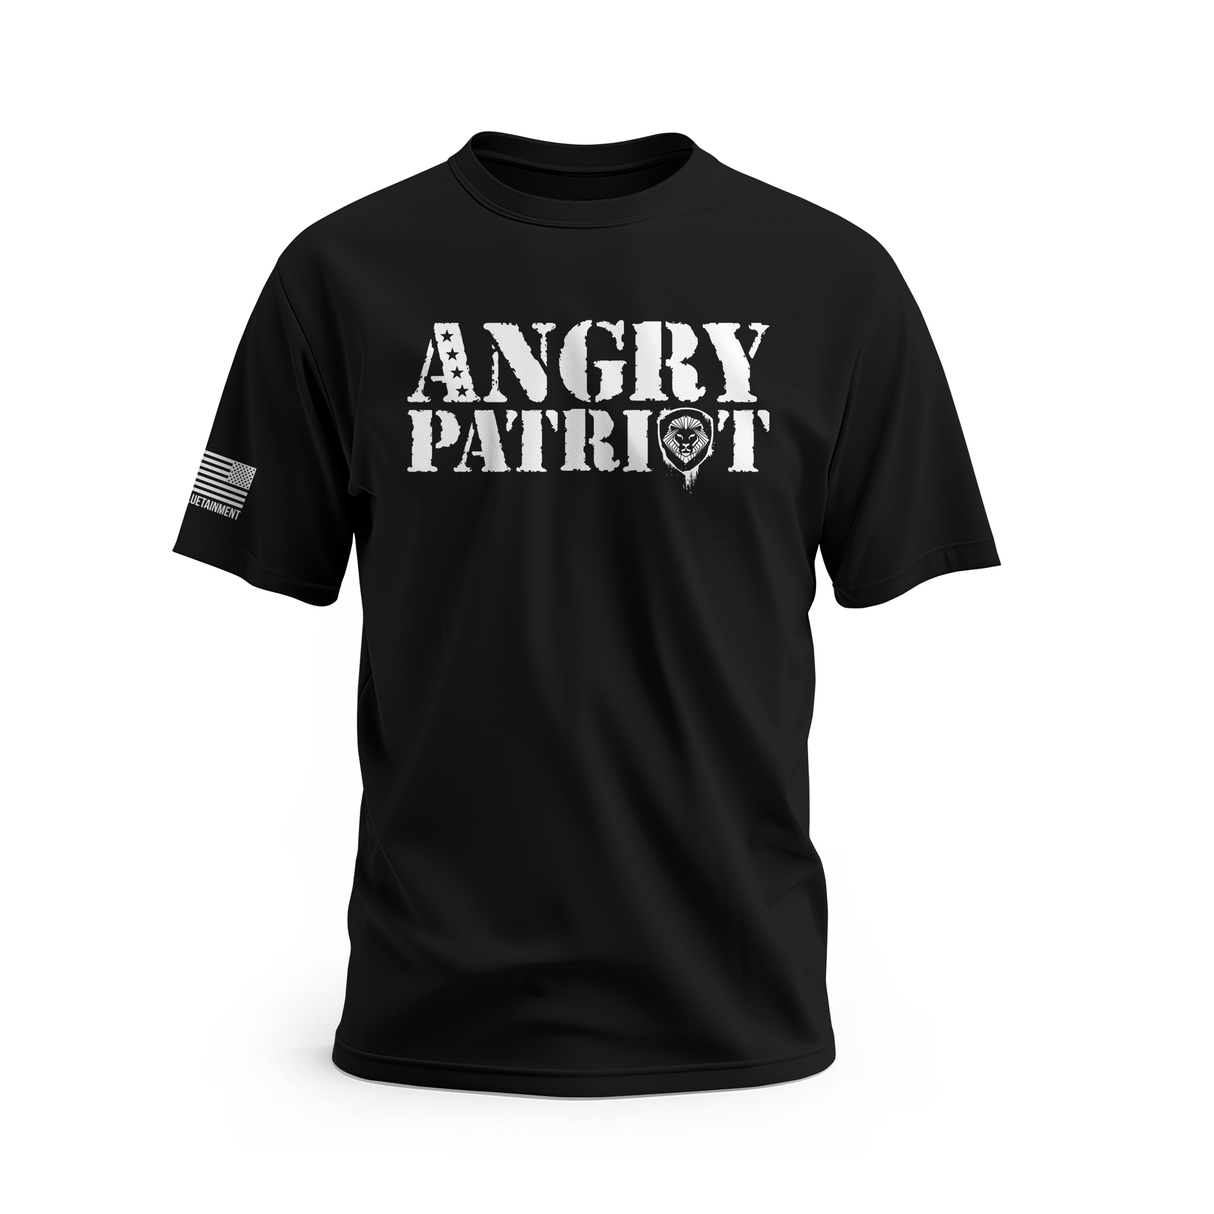 Angry Patriot Short-Sleeved T-Shirt